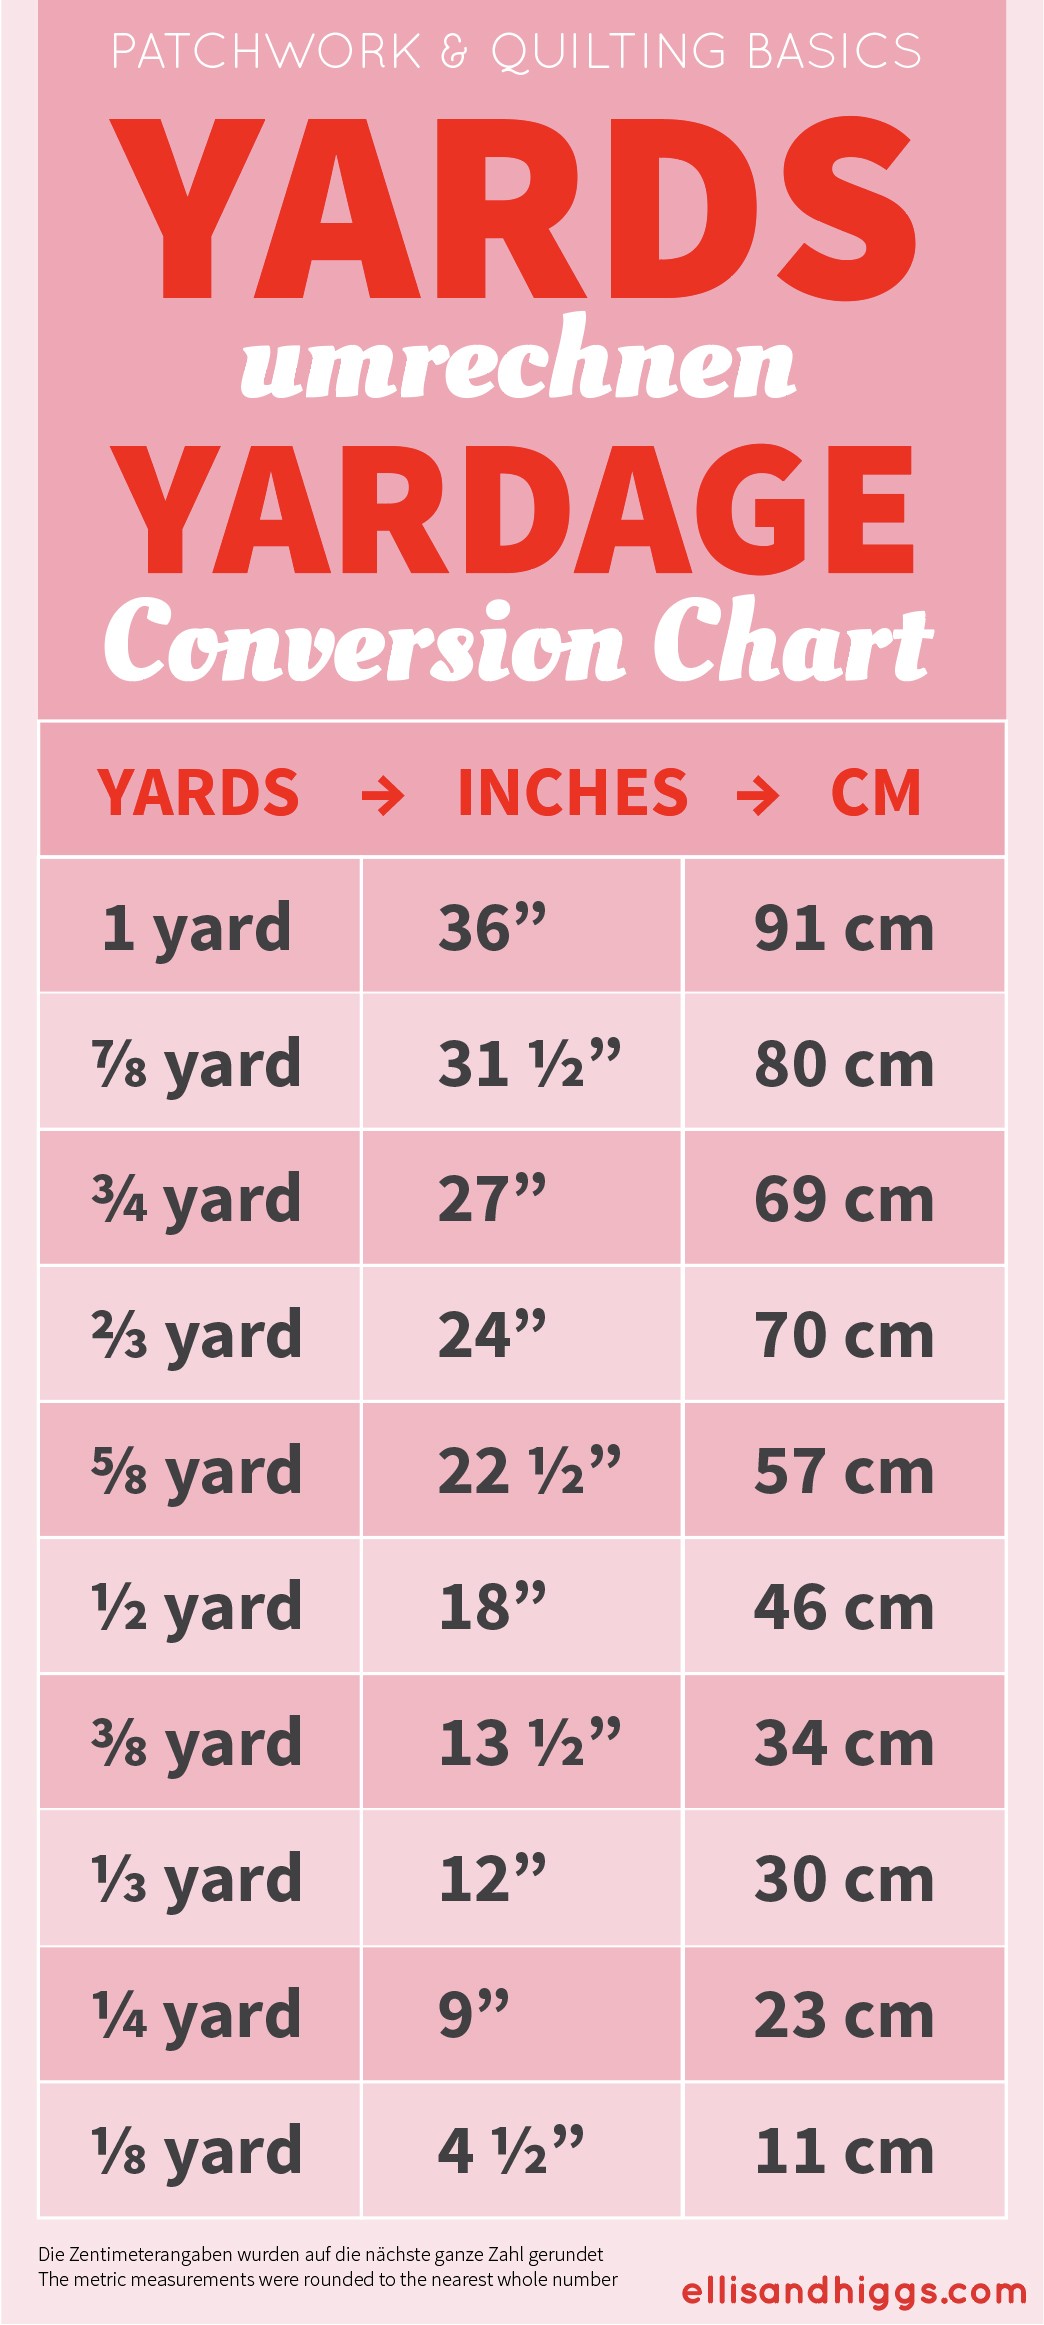 How To Read Yardage Conversion Chart